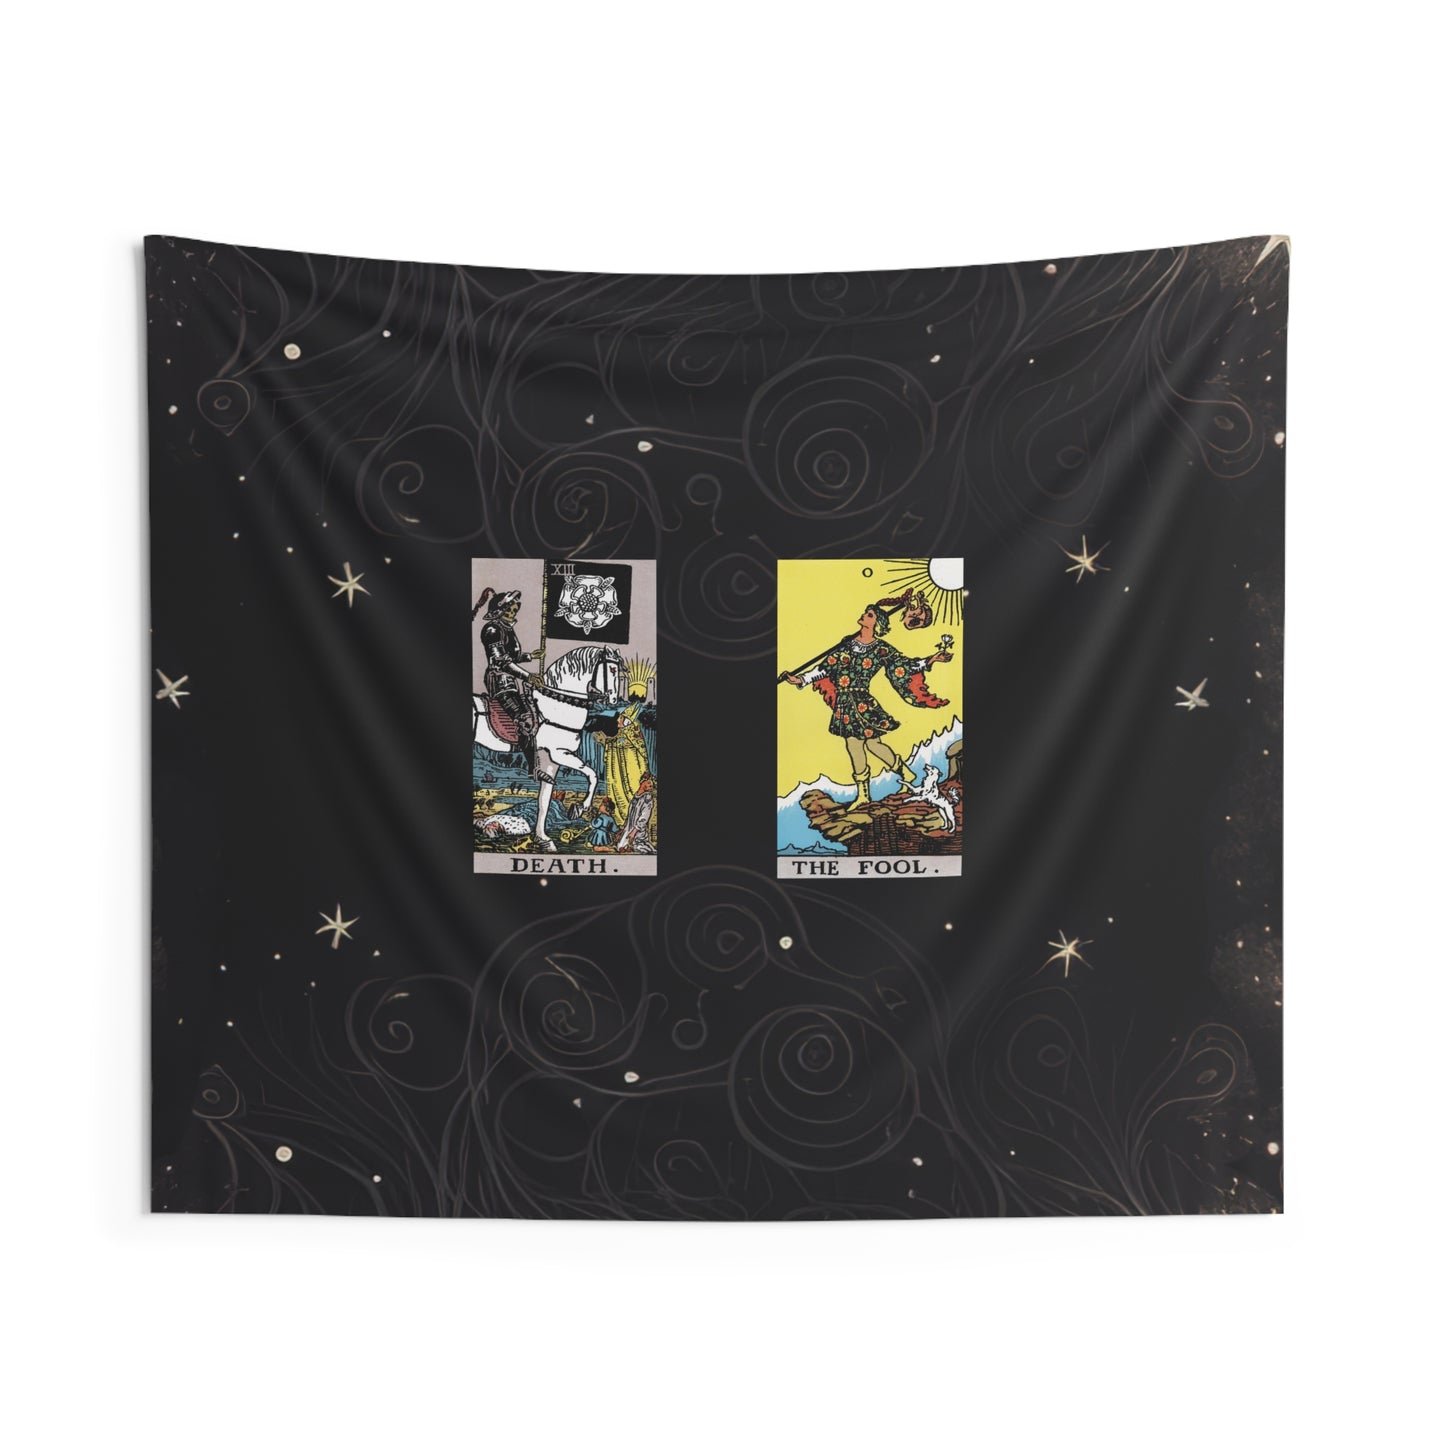 The Death AND The Fool Tarot Cards Altar Cloth or Tapestry with Starry Background